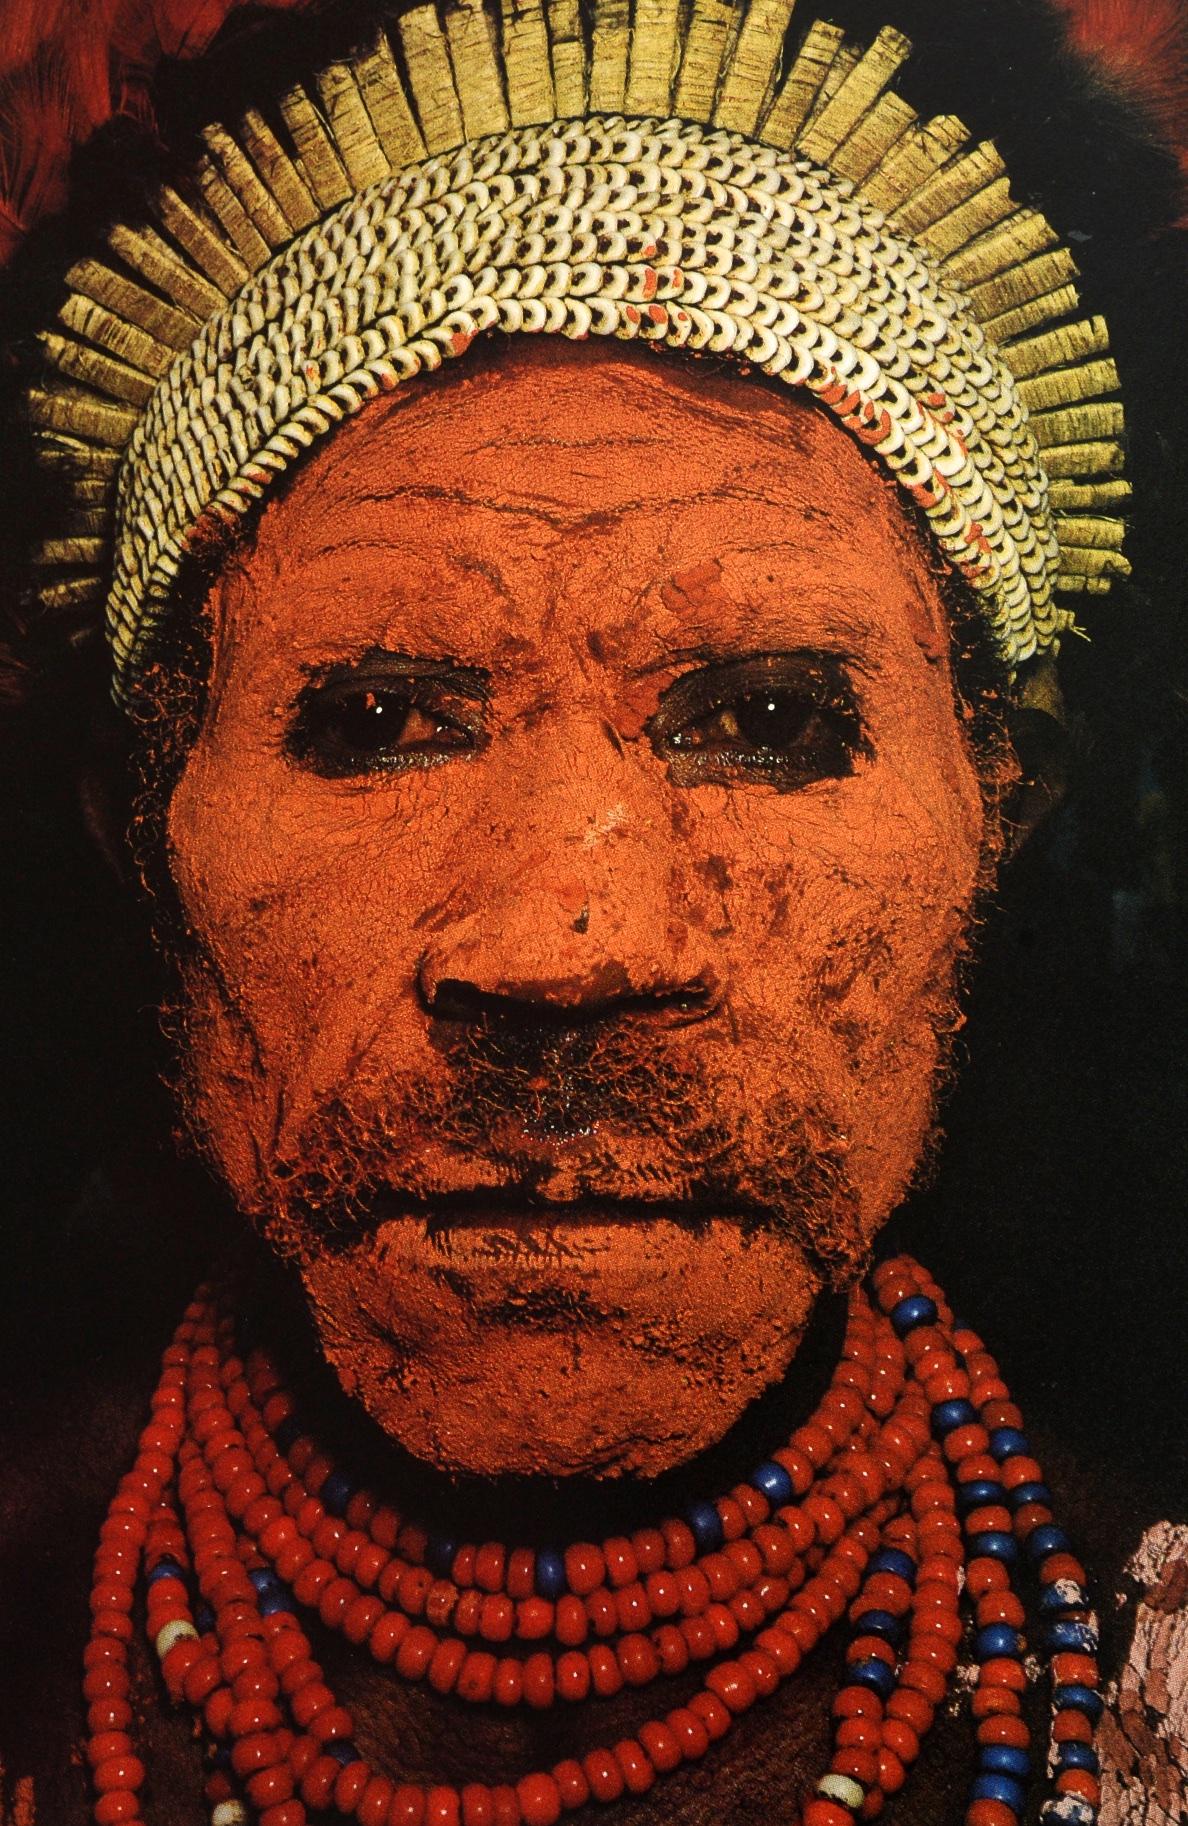 Man as Art Photos by Malcolm Kirk. The Viking Press, New York, NY, 1981. 1st Ed hardcover with dust jacket. A striking collection of photographic portraits and images of rare carved masks that captures the remarkable facial decorations and